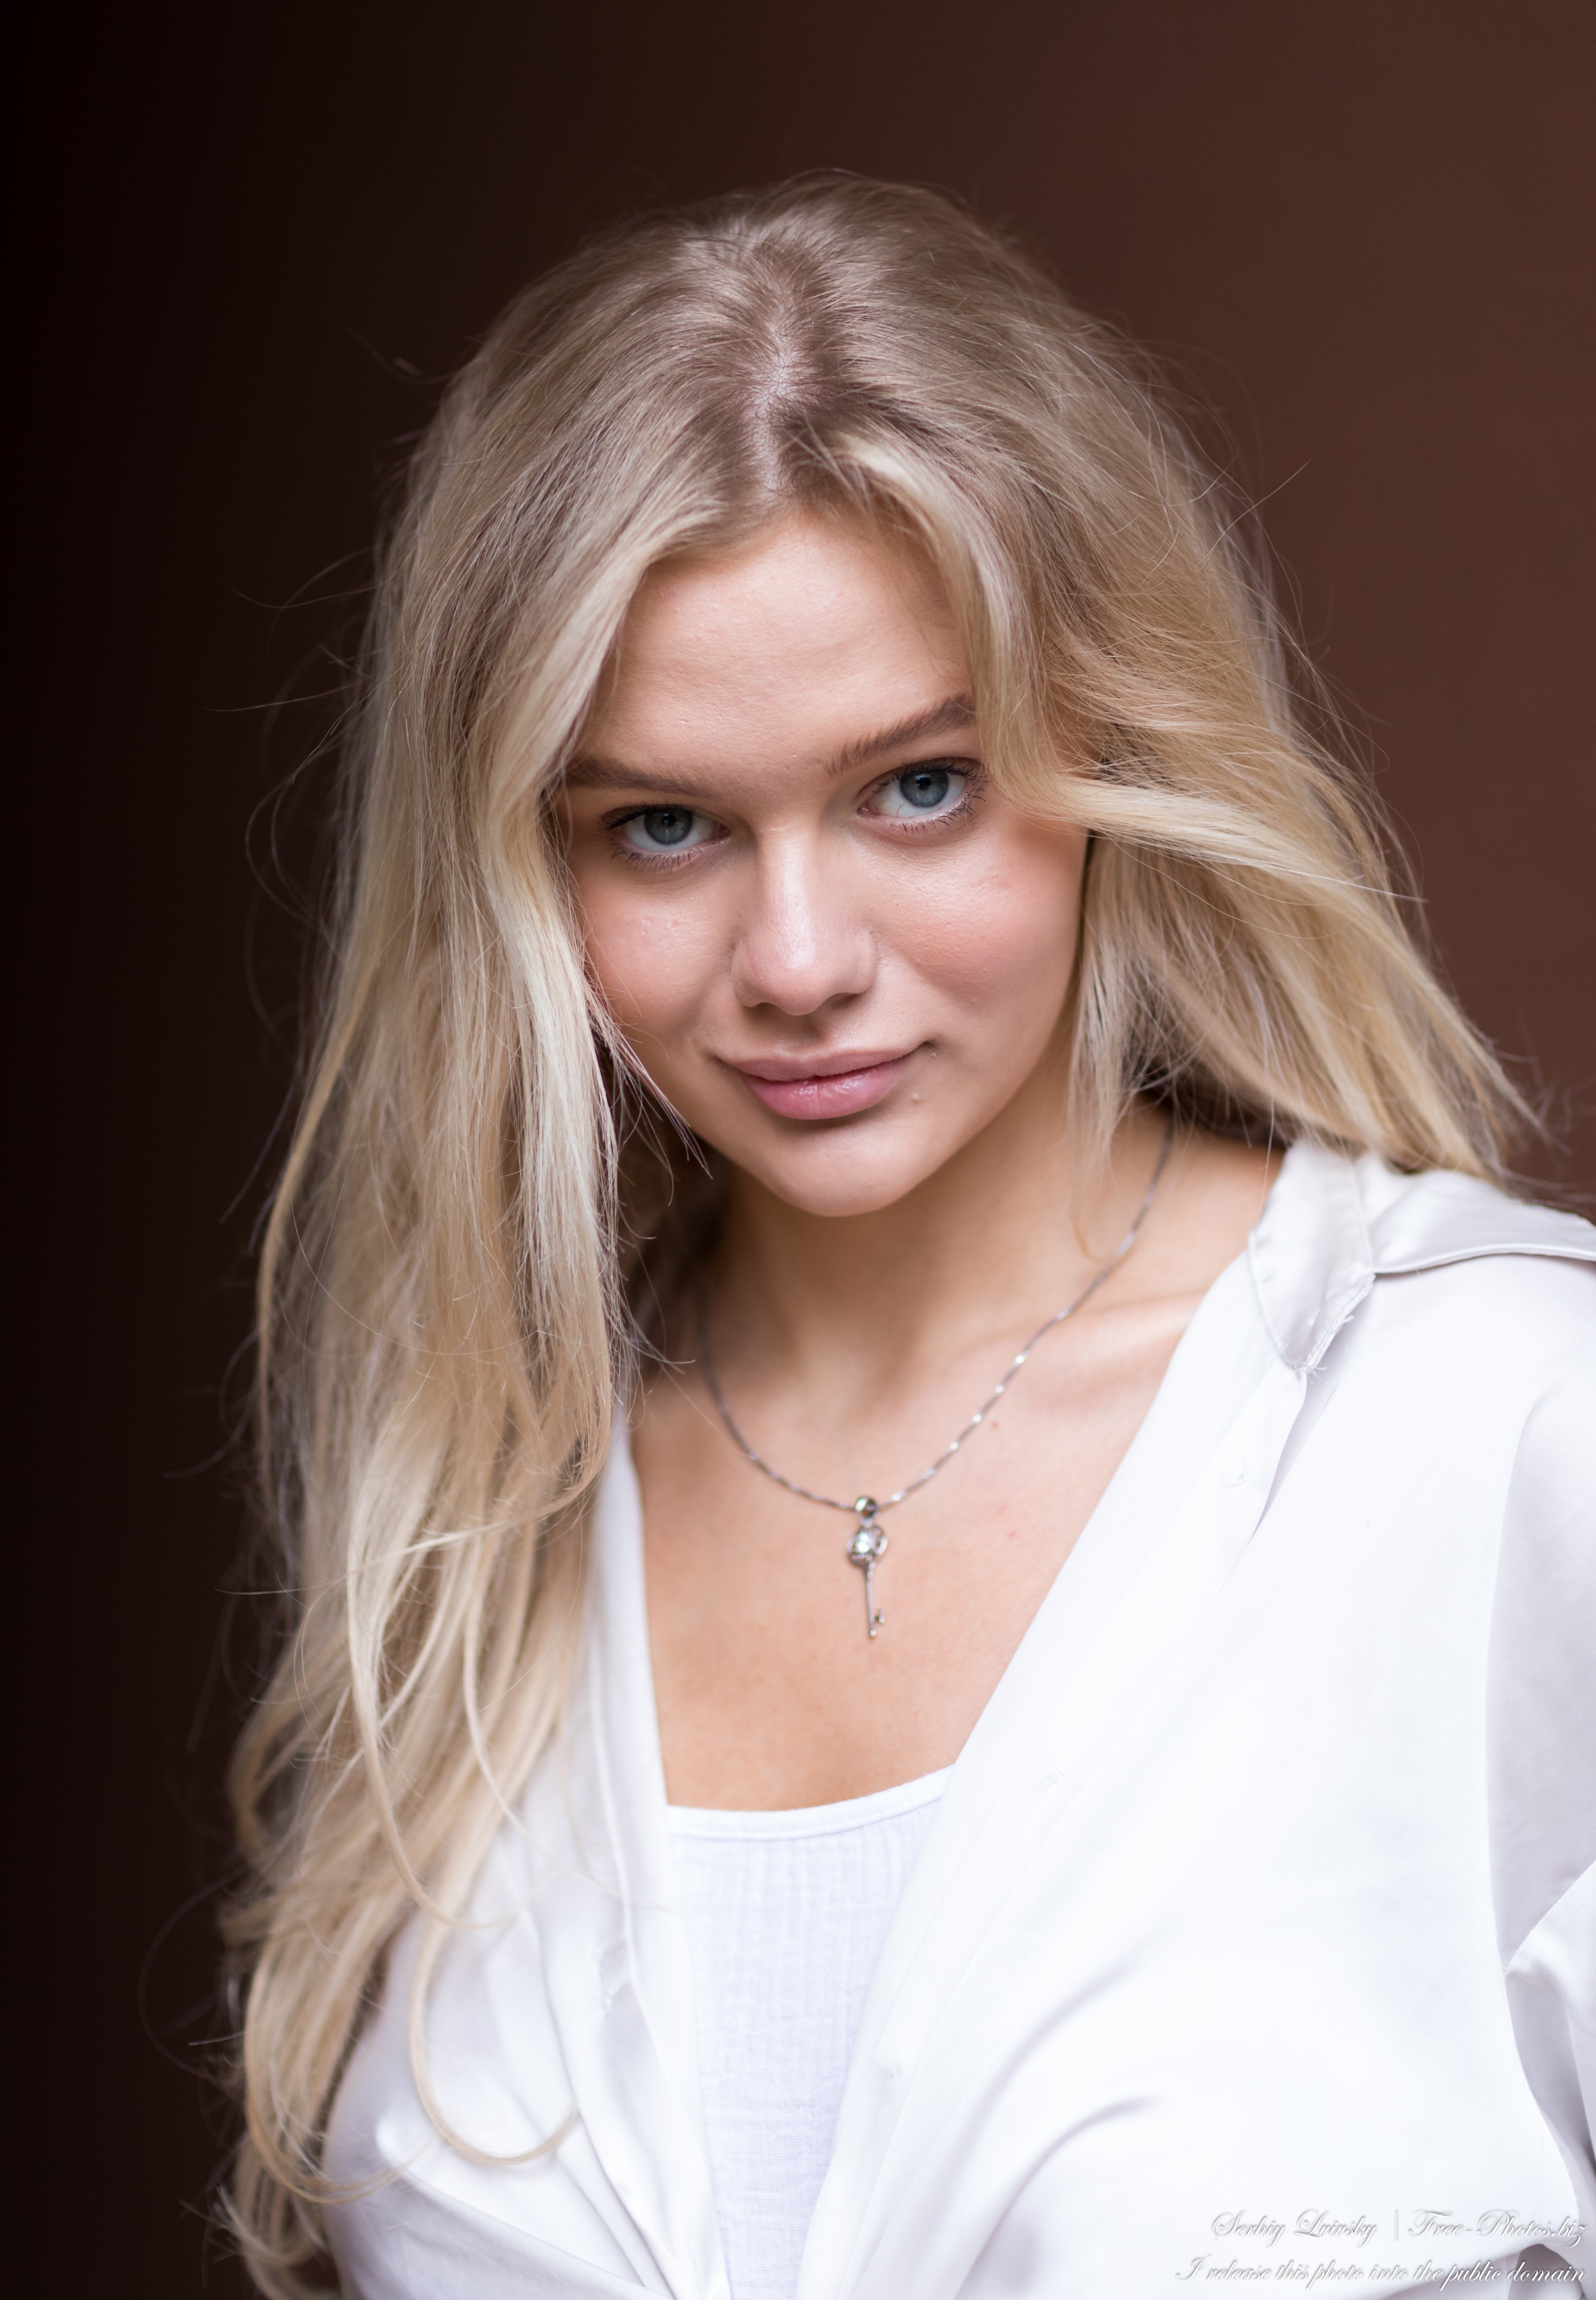 Oksana - a natural blonde 19-year-old girl photographed in July 2021 by Serhiy Lvivsky, picture 17